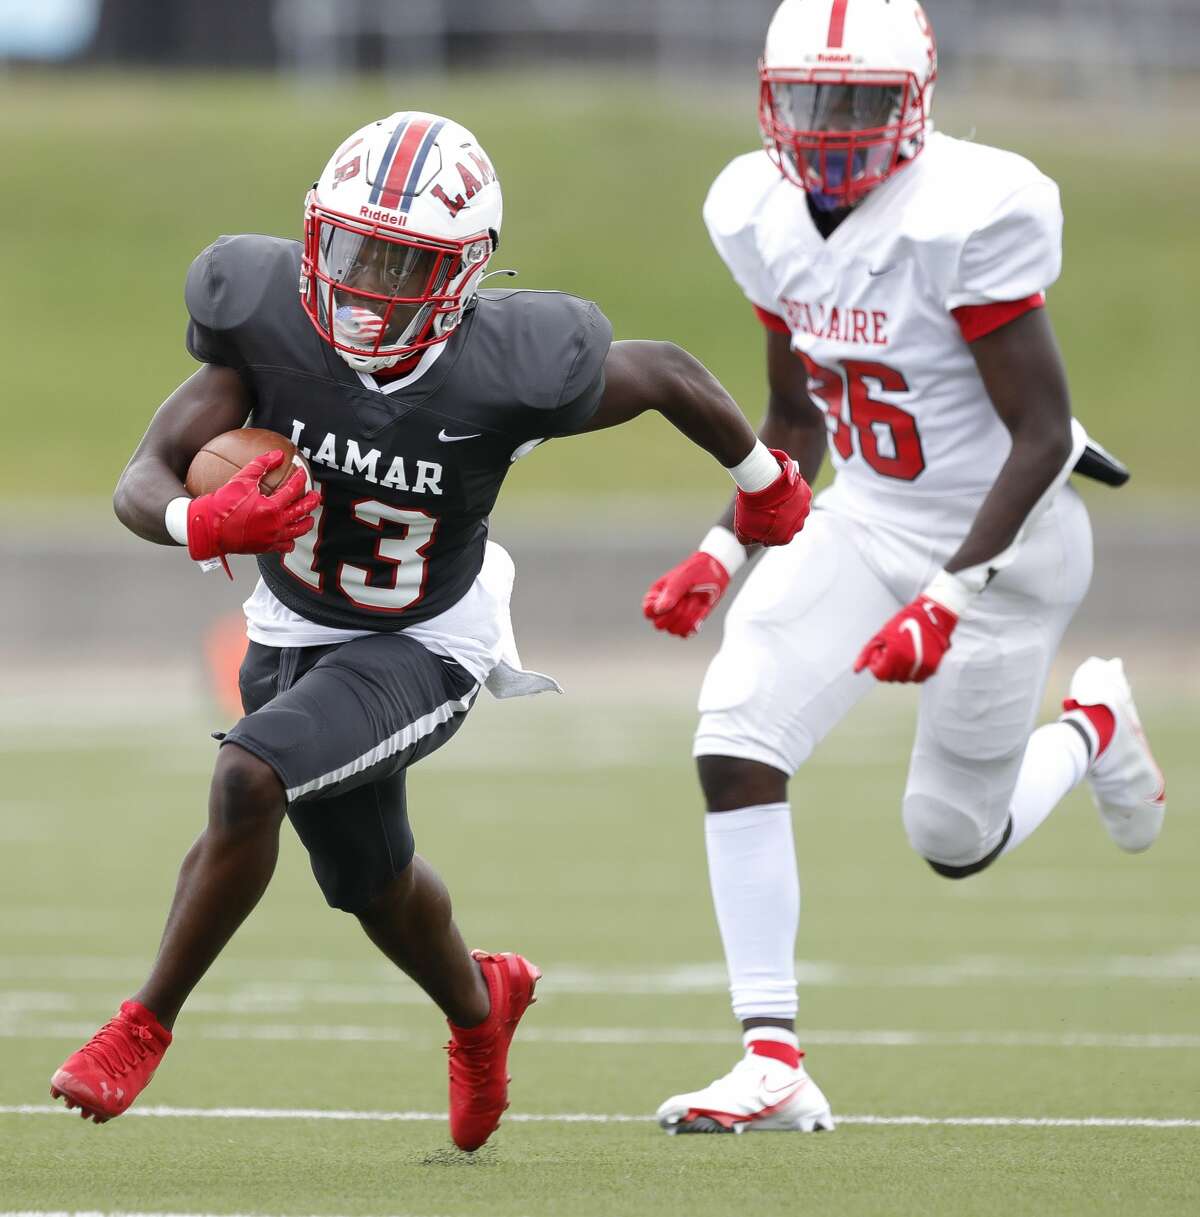 Lamar wide receiver TJ Rone (13) runs for a 29-yard touchdown during the second quarter of a District 18-6A high school football game at Delmar Stadium, Saturday, Oct. 24, 2020, in Houston.